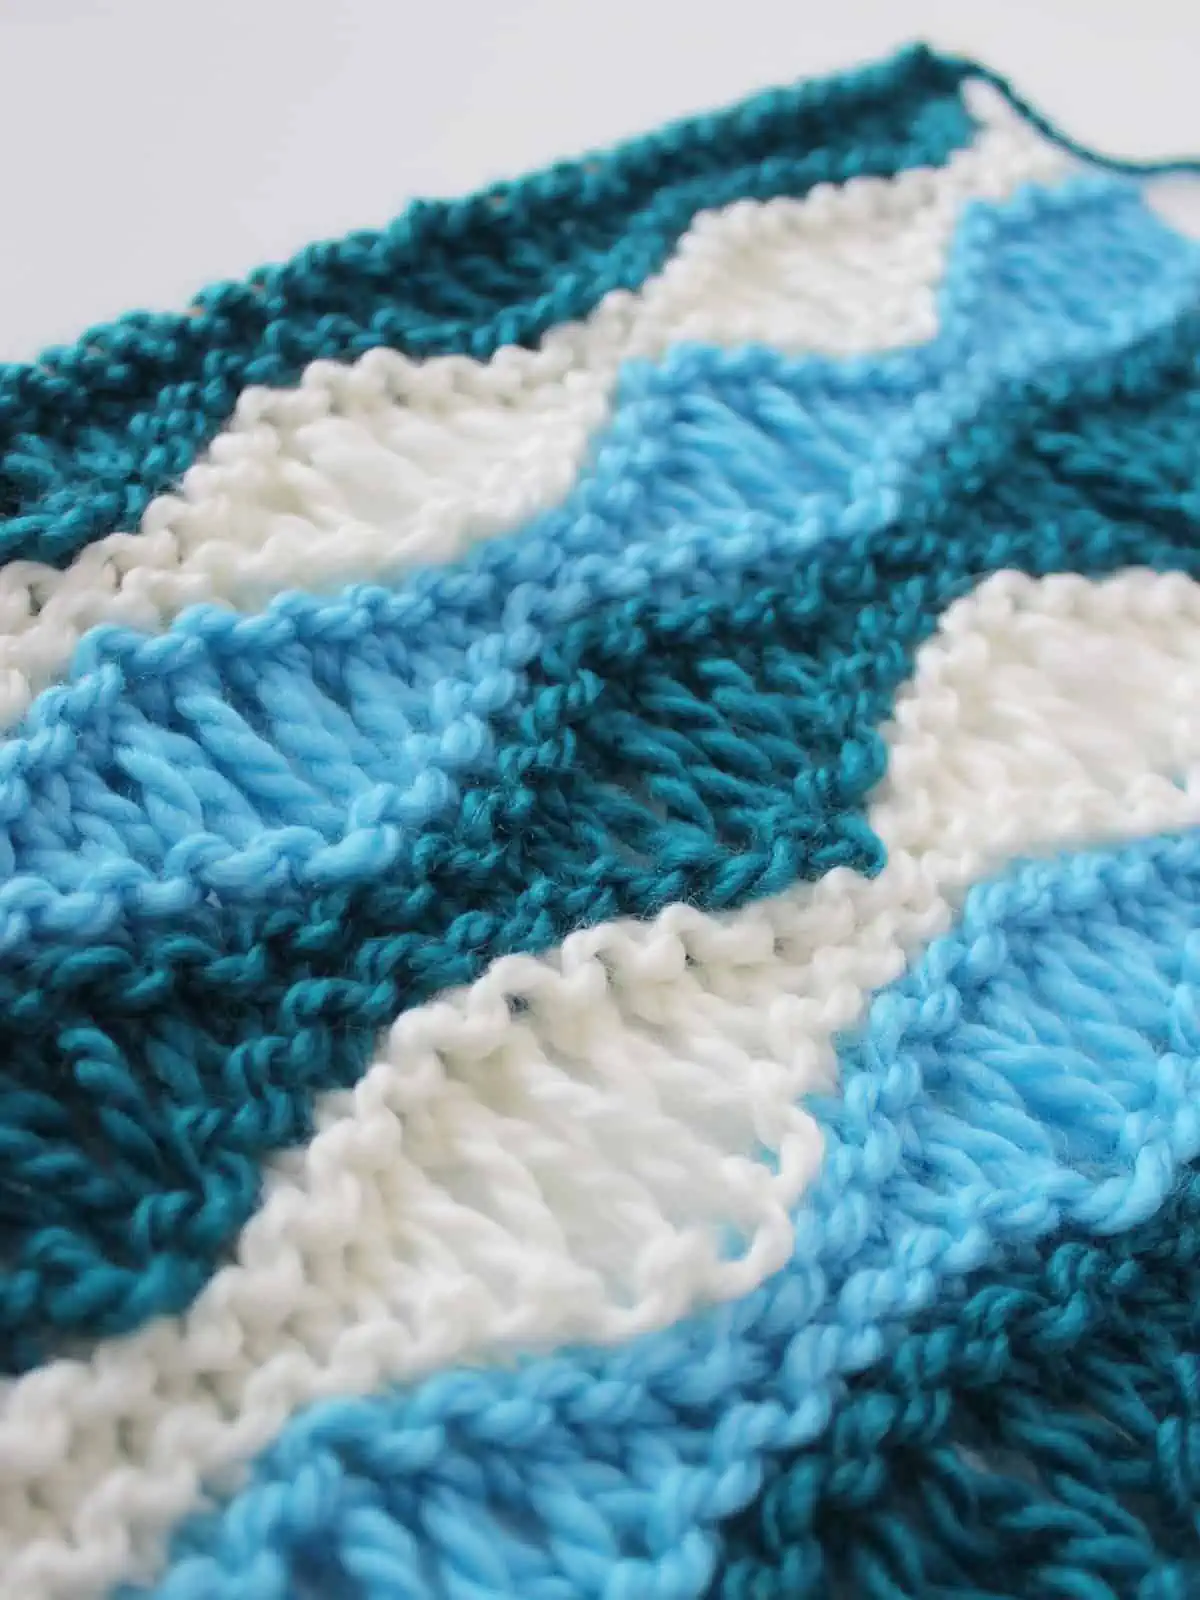 Close-up side view of the Sea Foam Wave Drop Stitch Knitting Pattern in dark blue, light blue, and white yarn colors.